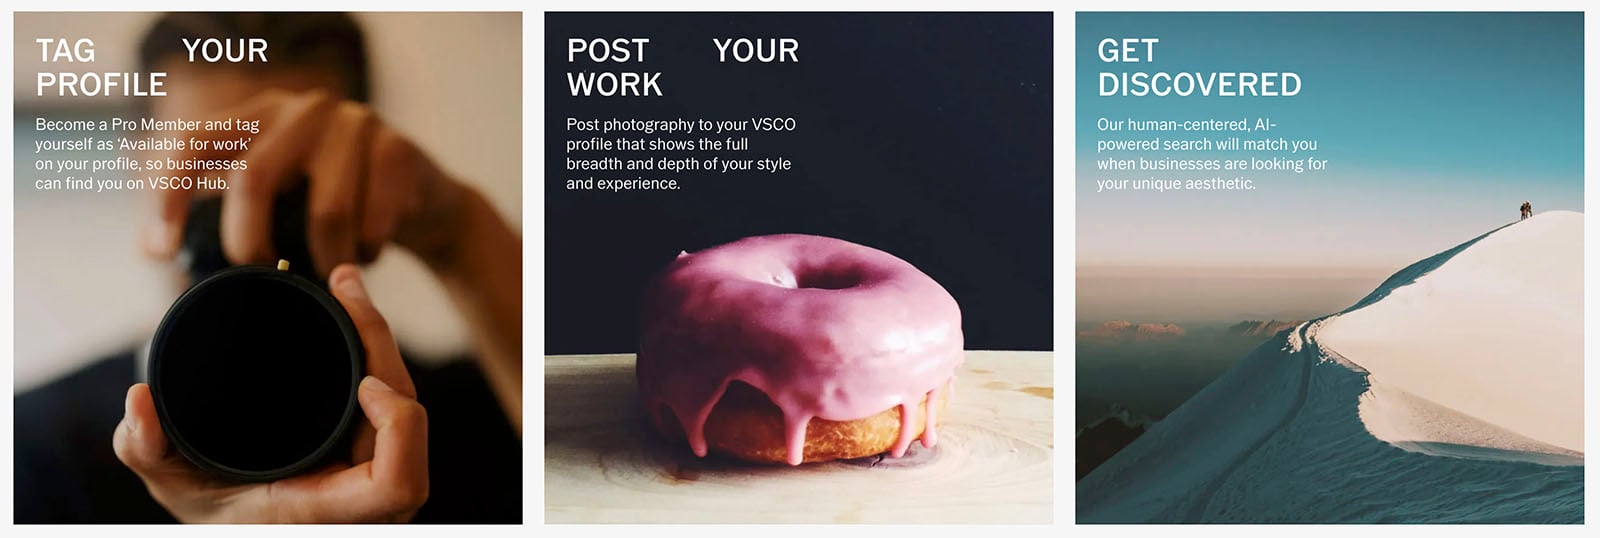 Three connected images promoting a platform: 1) a person holding a camera lens facing toward the viewer. 2) a pink frosted donut on a plate. 3) a scenic view of a winding road on a coastal cliff. each image includes text encouraging user interaction on social media.